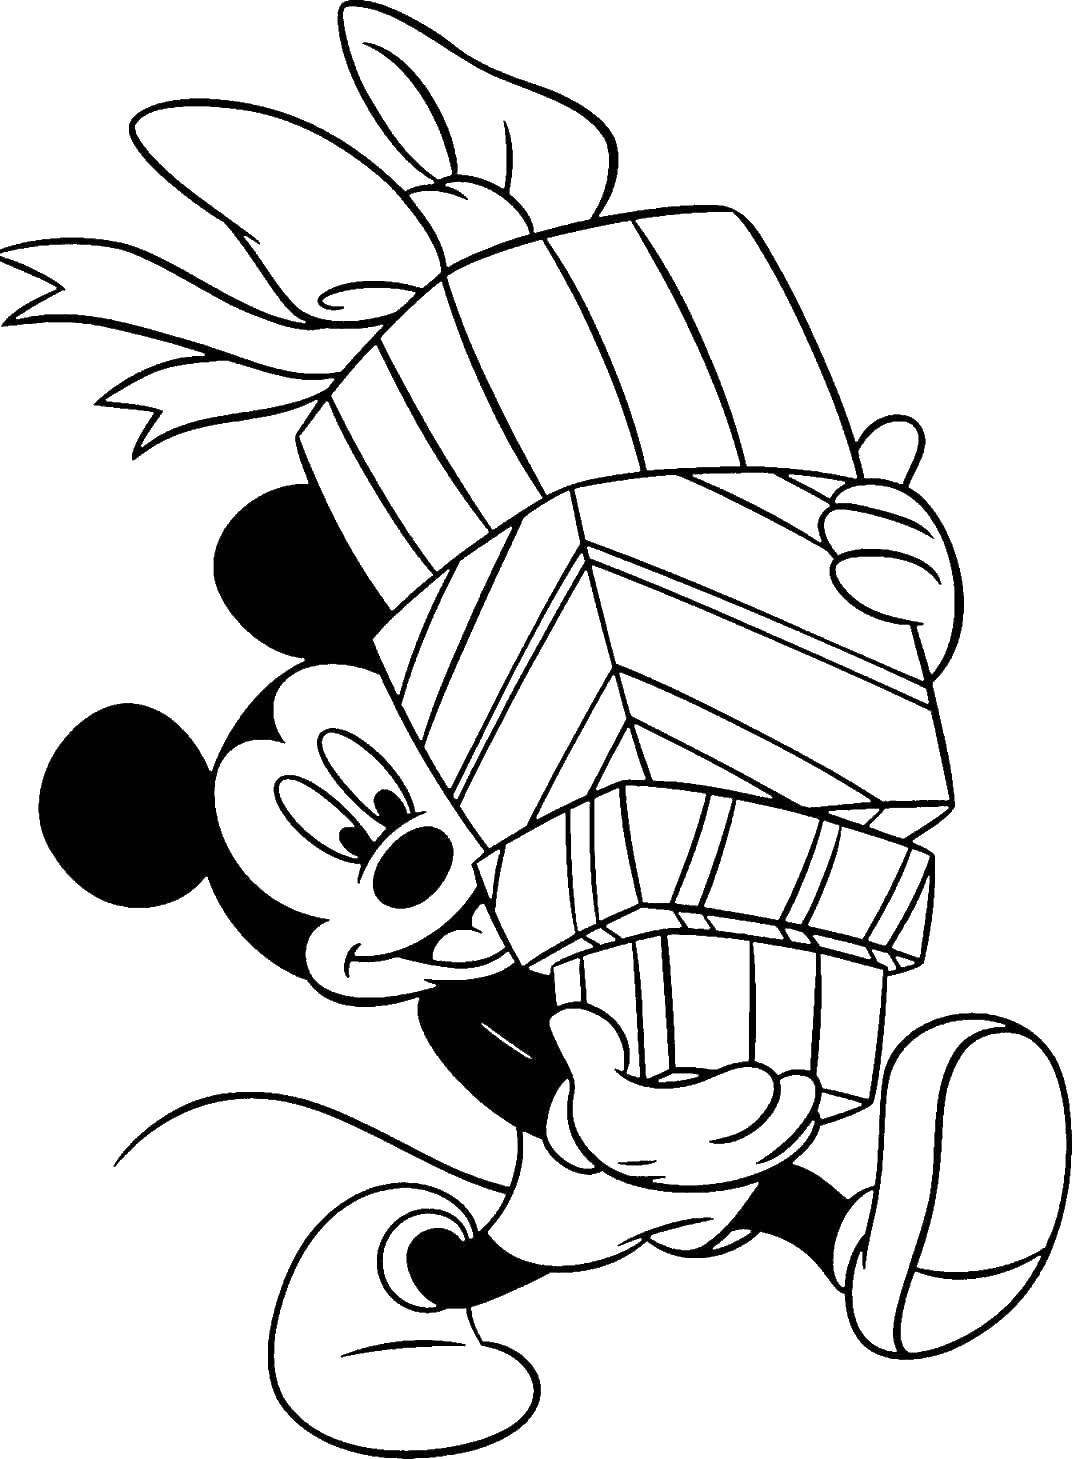 Coloring Mickey mouse bears gifts. Category Cartoon character. Tags:  Disney, Mickey Mouse.